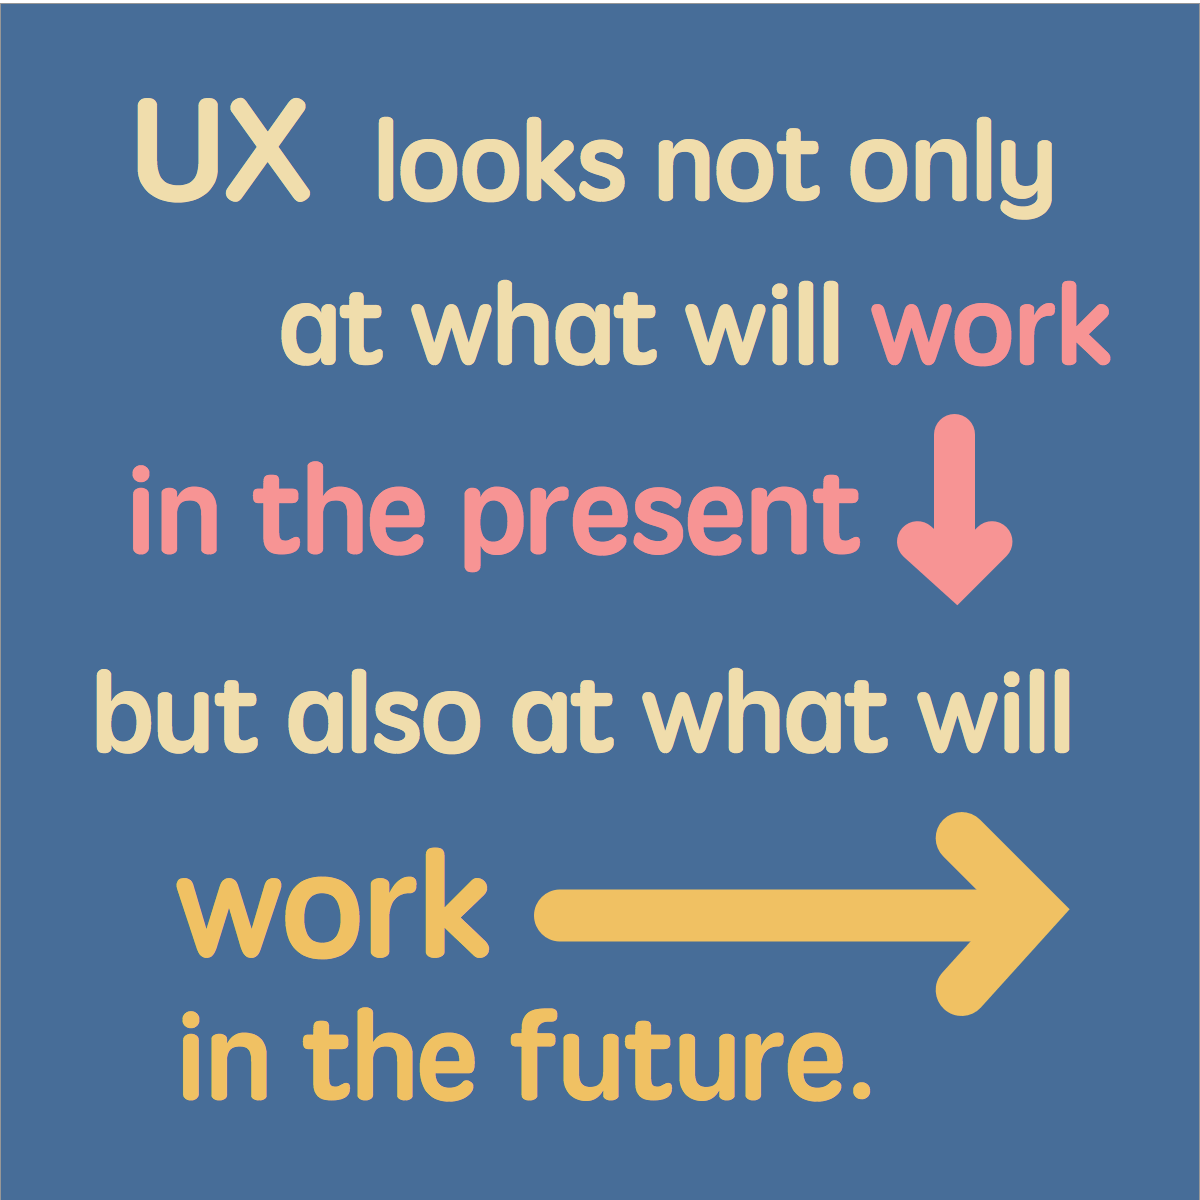 UX looks not only at what will work in the present but also at what will work in the future.